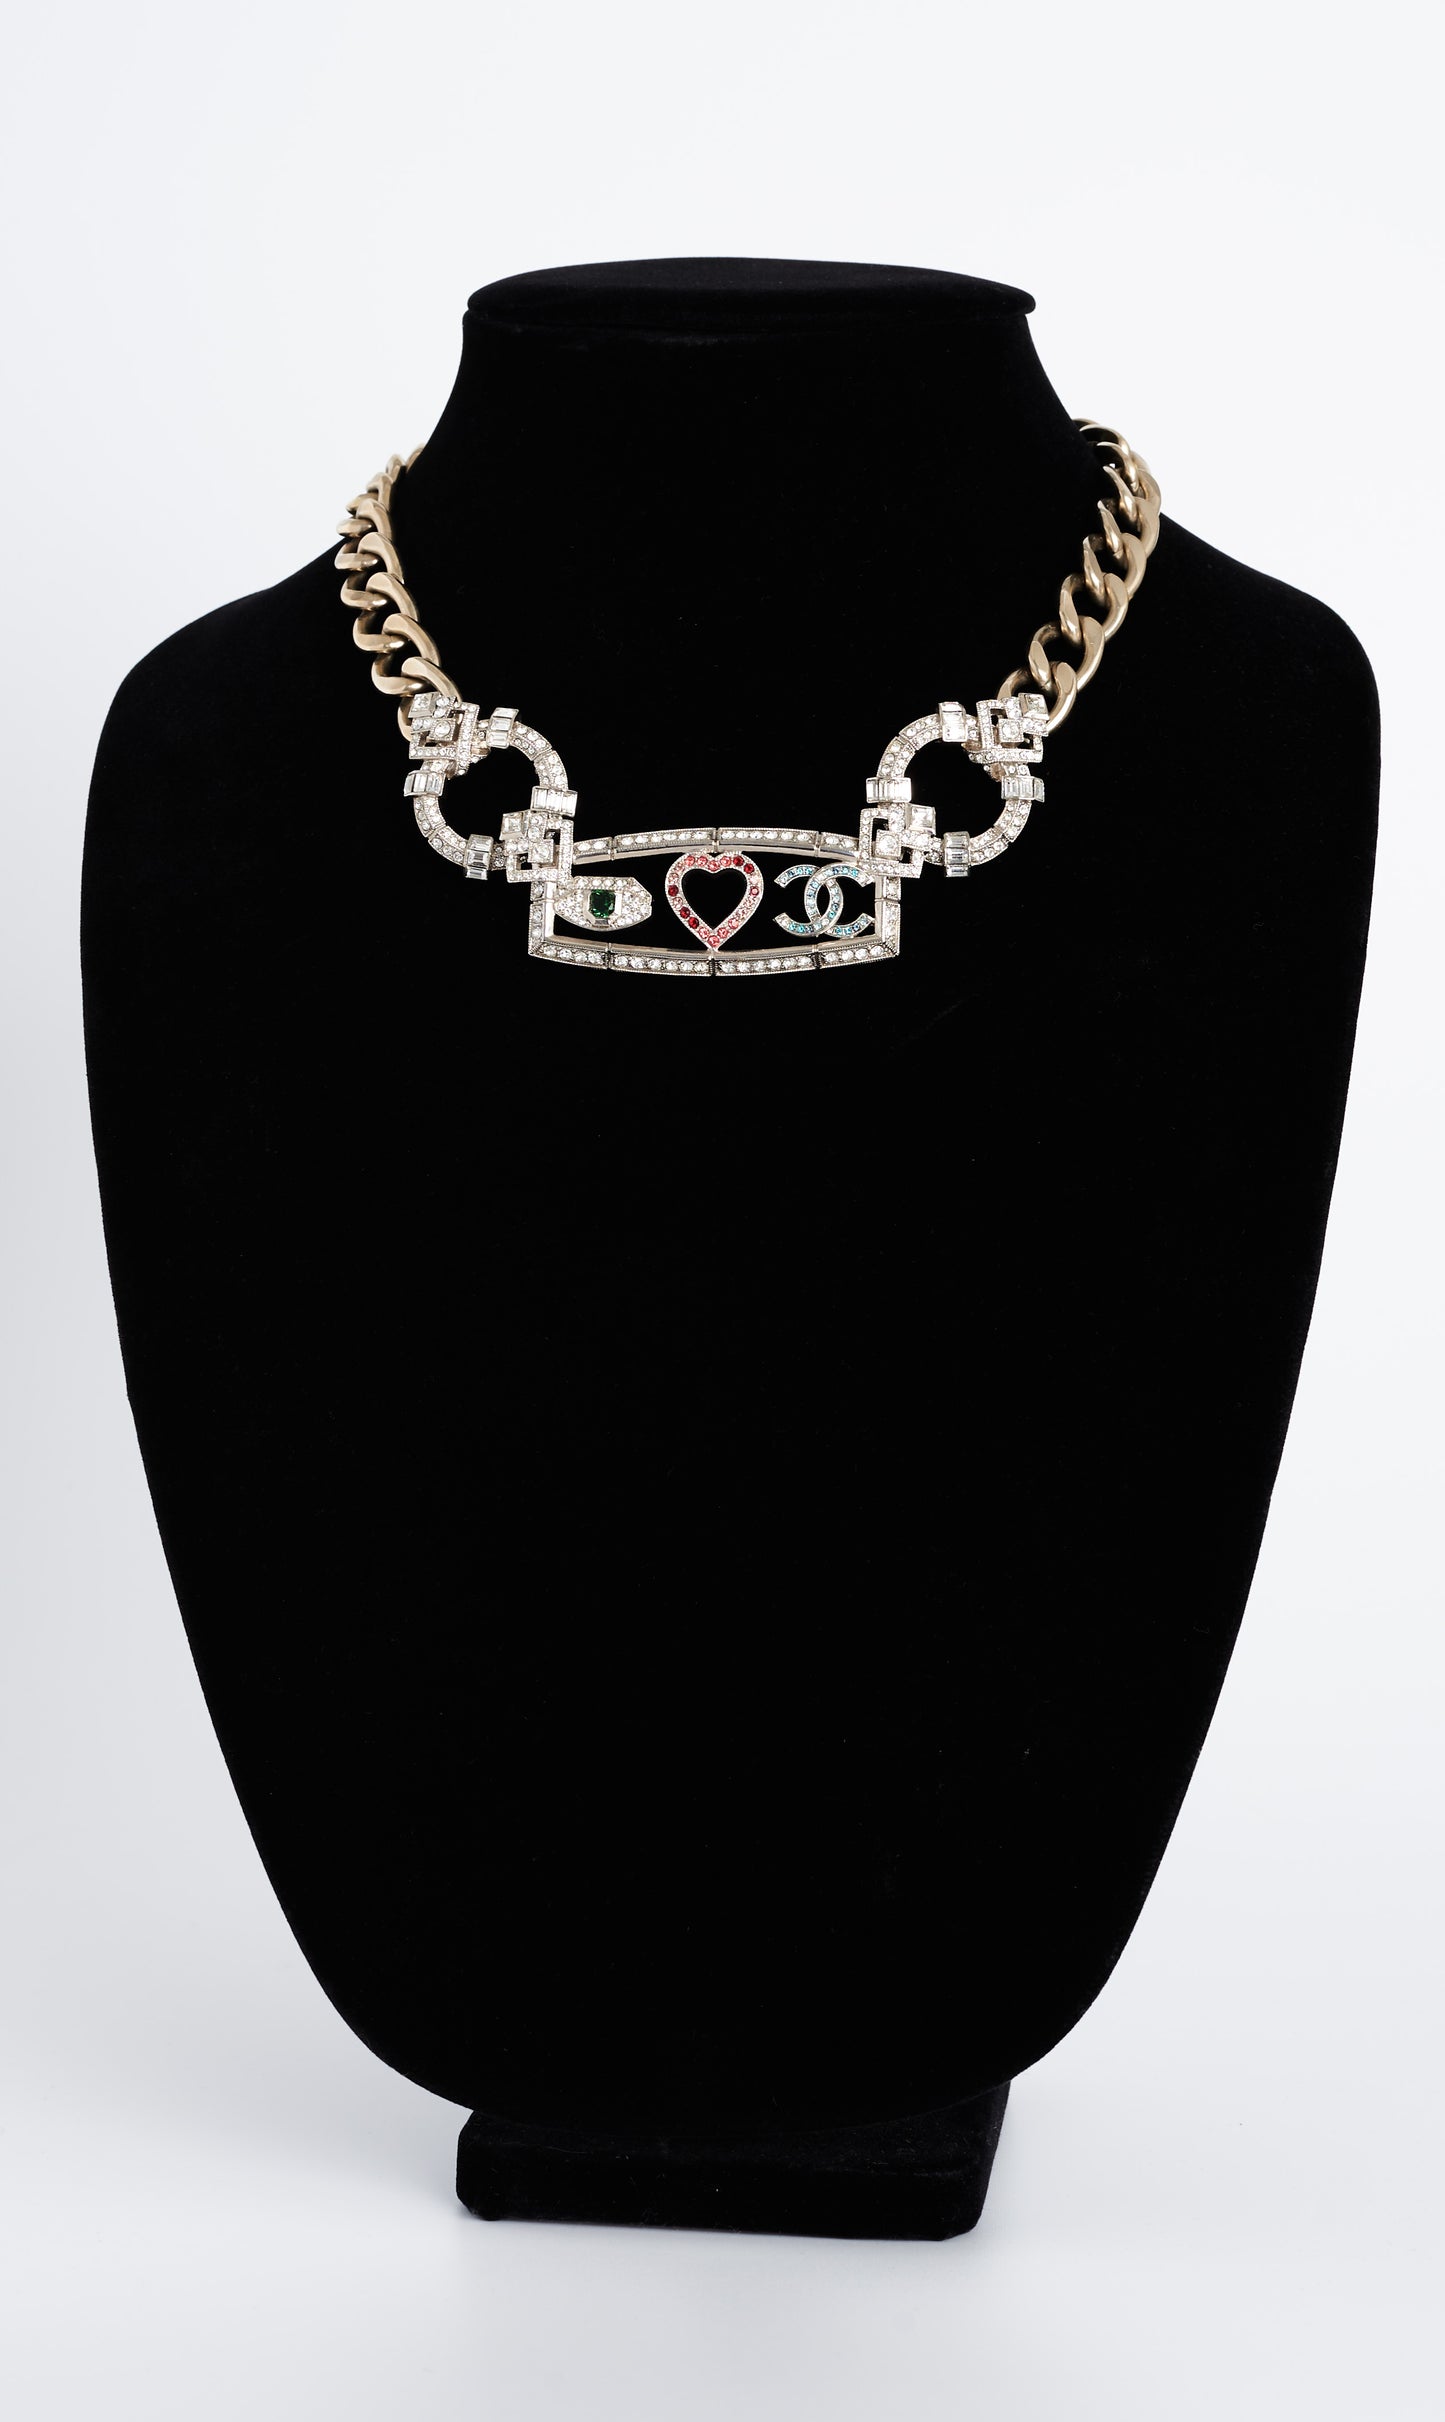 Chanel 'I Love Chanel' Necklace